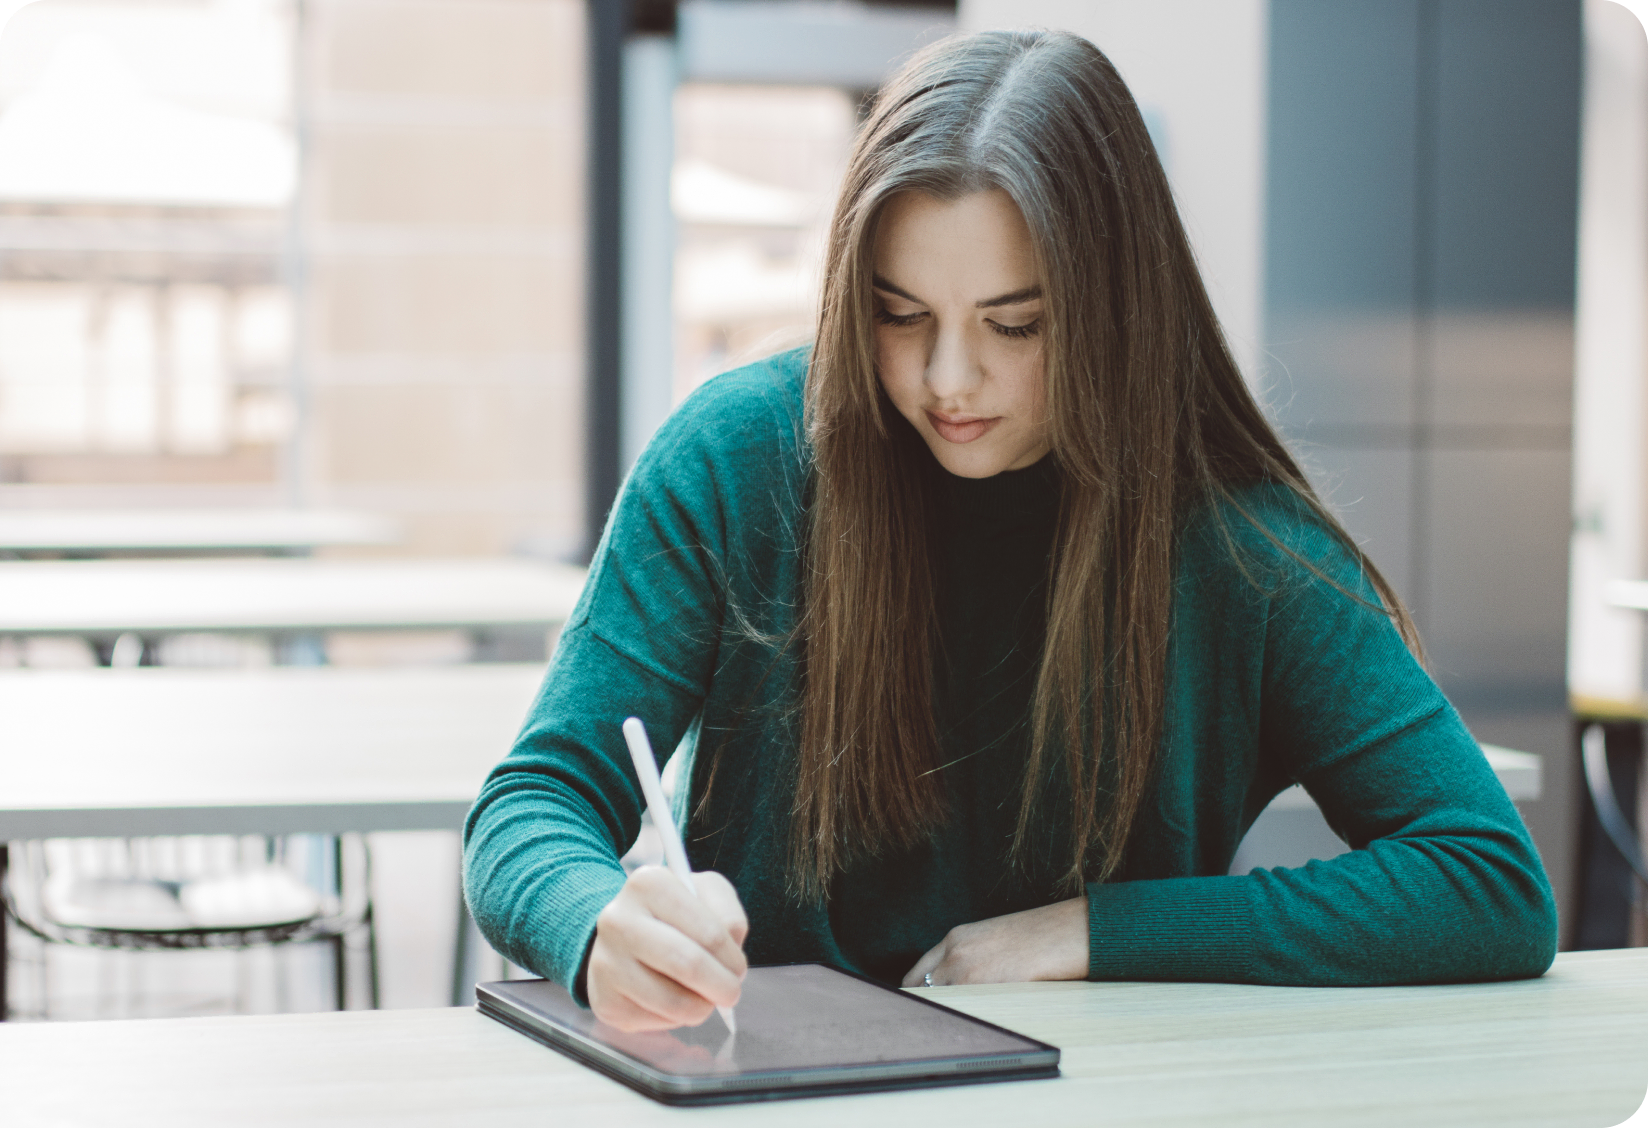 Image of a student taking notes